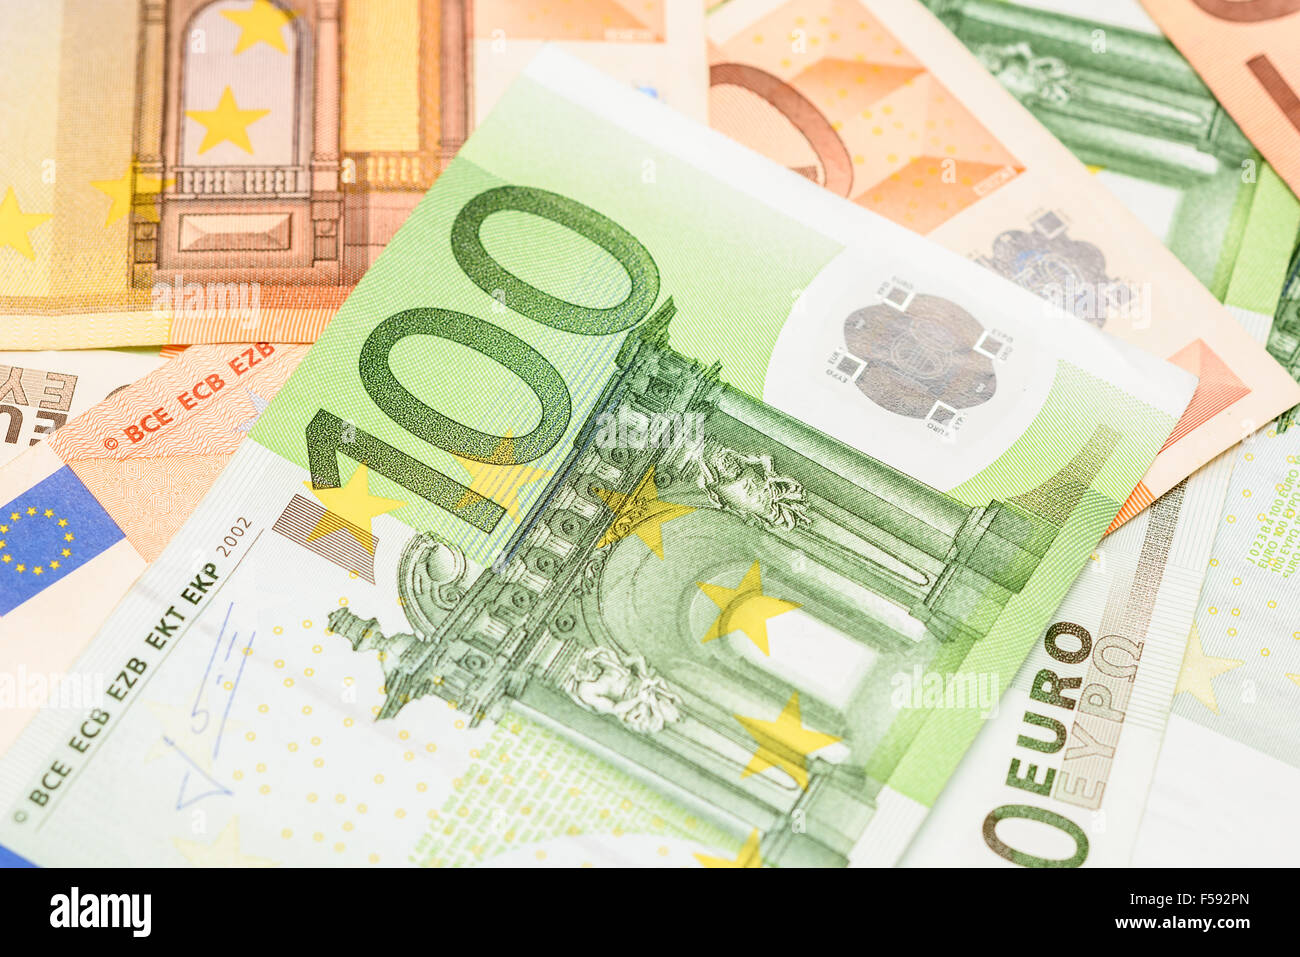 One Hundred Euro Banknote On Euro Bills Background Stock Photo